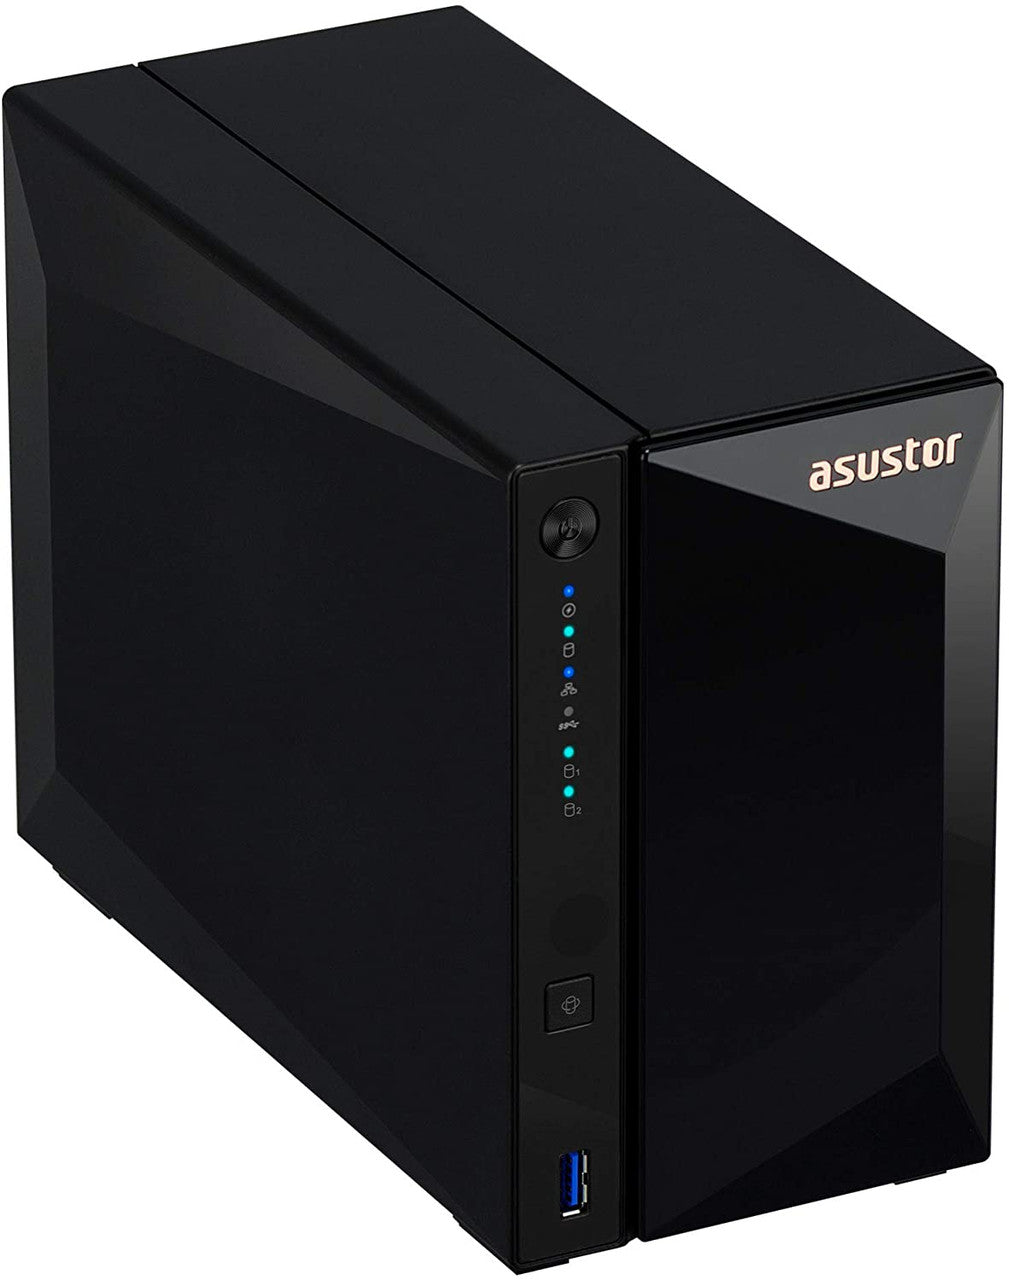 Asustor AS3302T 2-Bay Drivestor 2 PRO NAS with 2GB RAM and 24TB (2x12TB) Seagate Ironwolf PRO Drives Fully Assembled and Tested